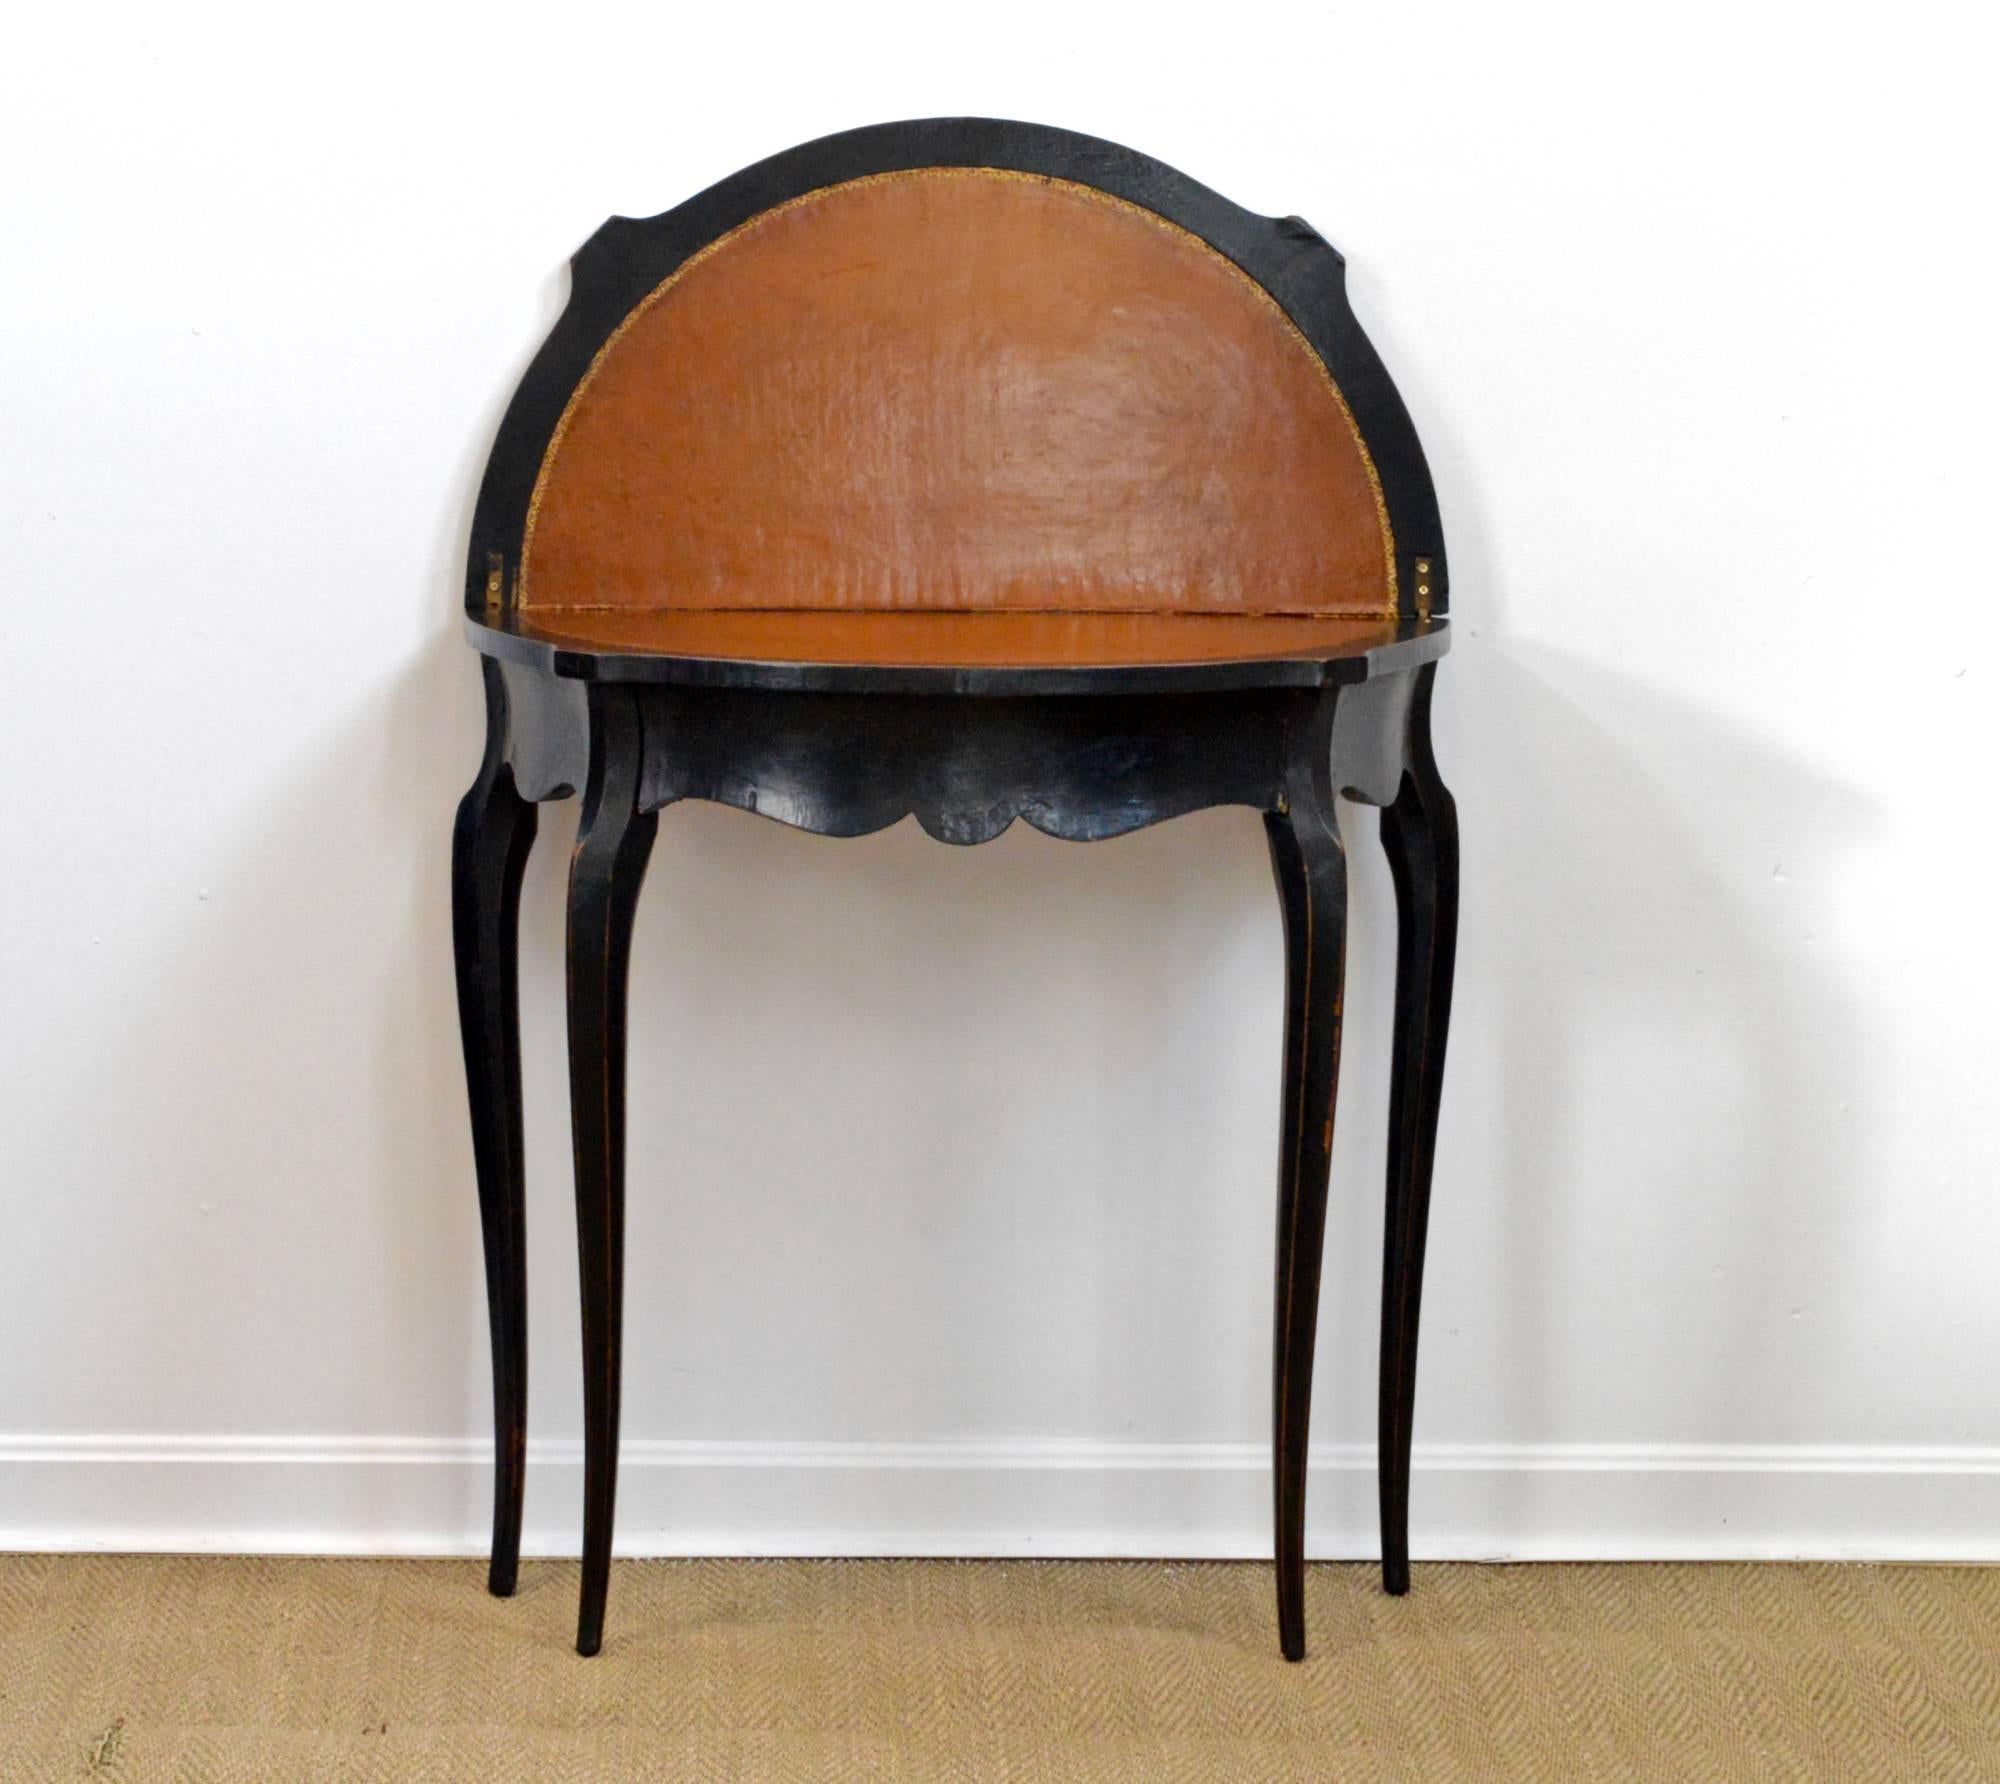 Ebonized Louis XV styled card table of demilune form having a flip-top that opens to reveal a lovely worn leather top which is accented by an embossed outer edge. Rear legs swing behind to supply support to the open game table surface. Wear and